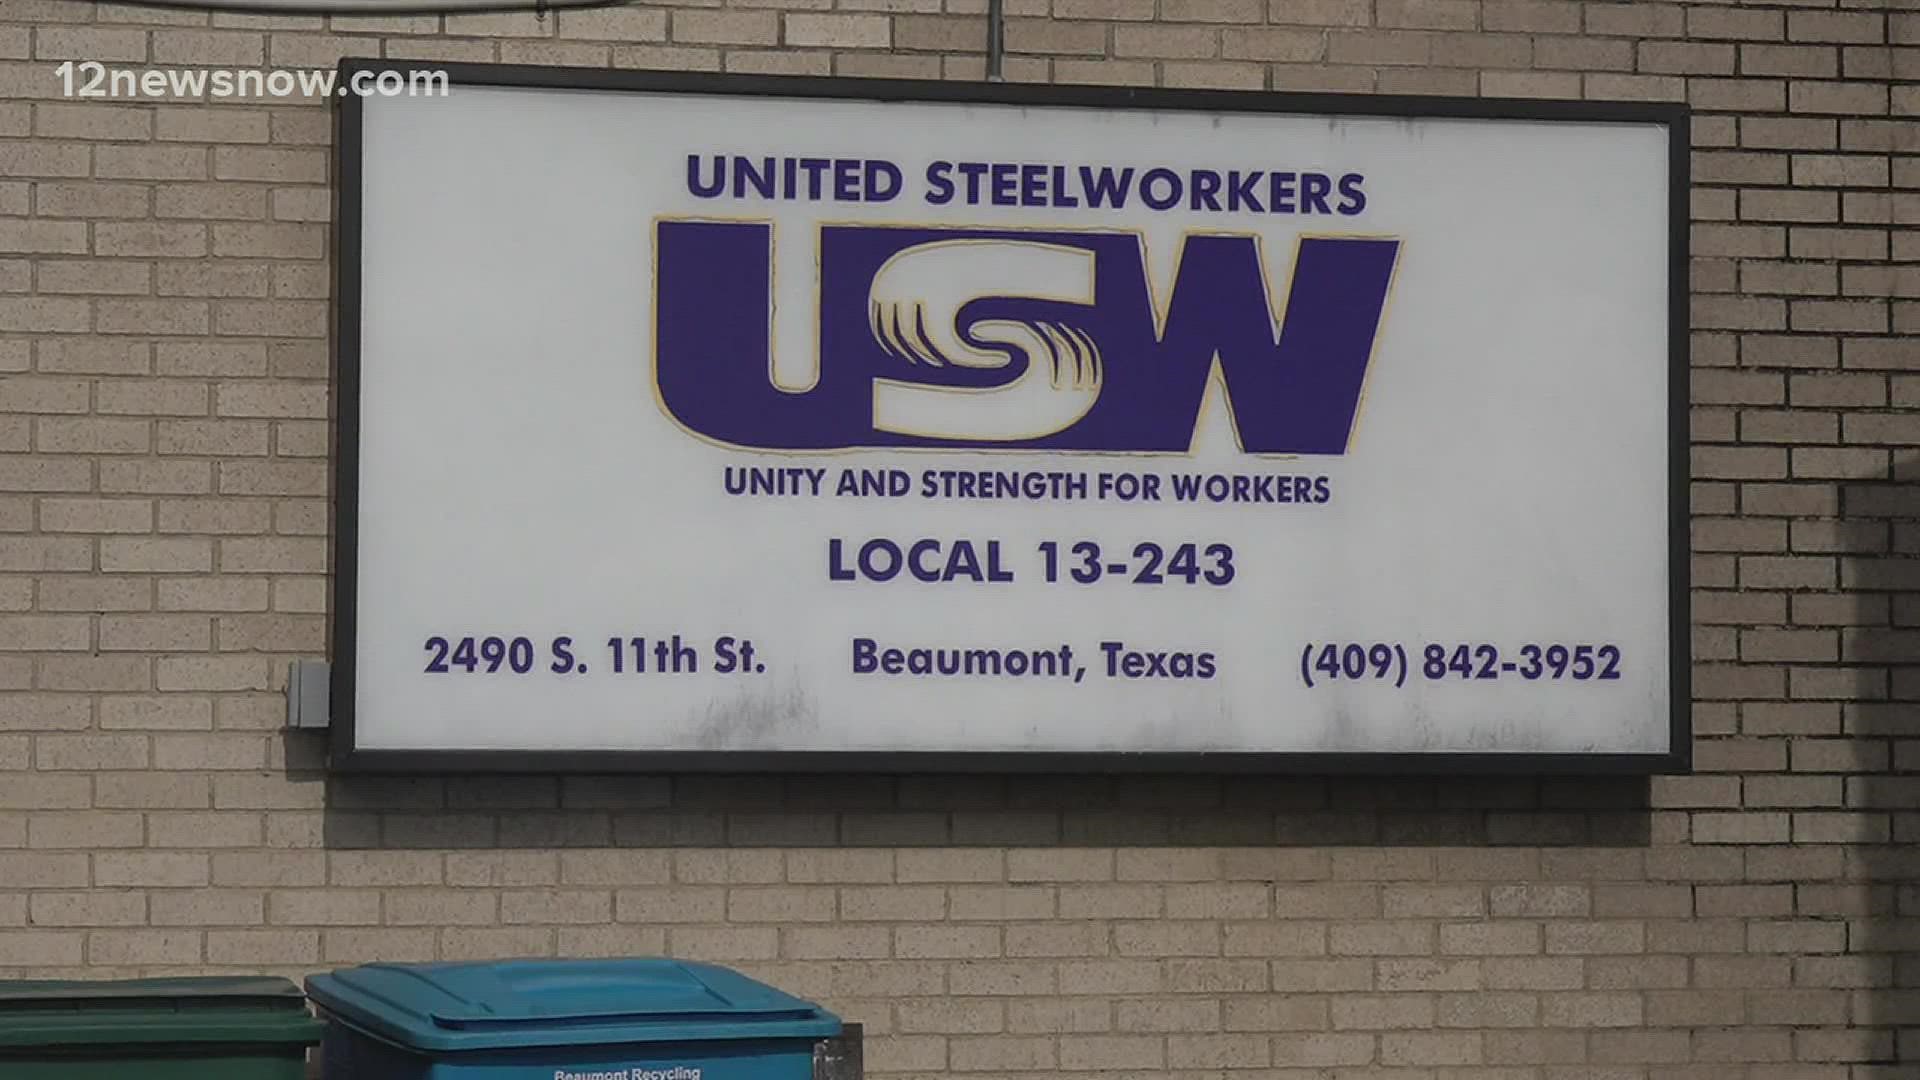 Four months after the ExxonMobil lockout began, United Steel Workers are still without their jobs. Members said they never expected the lockout to last this long.